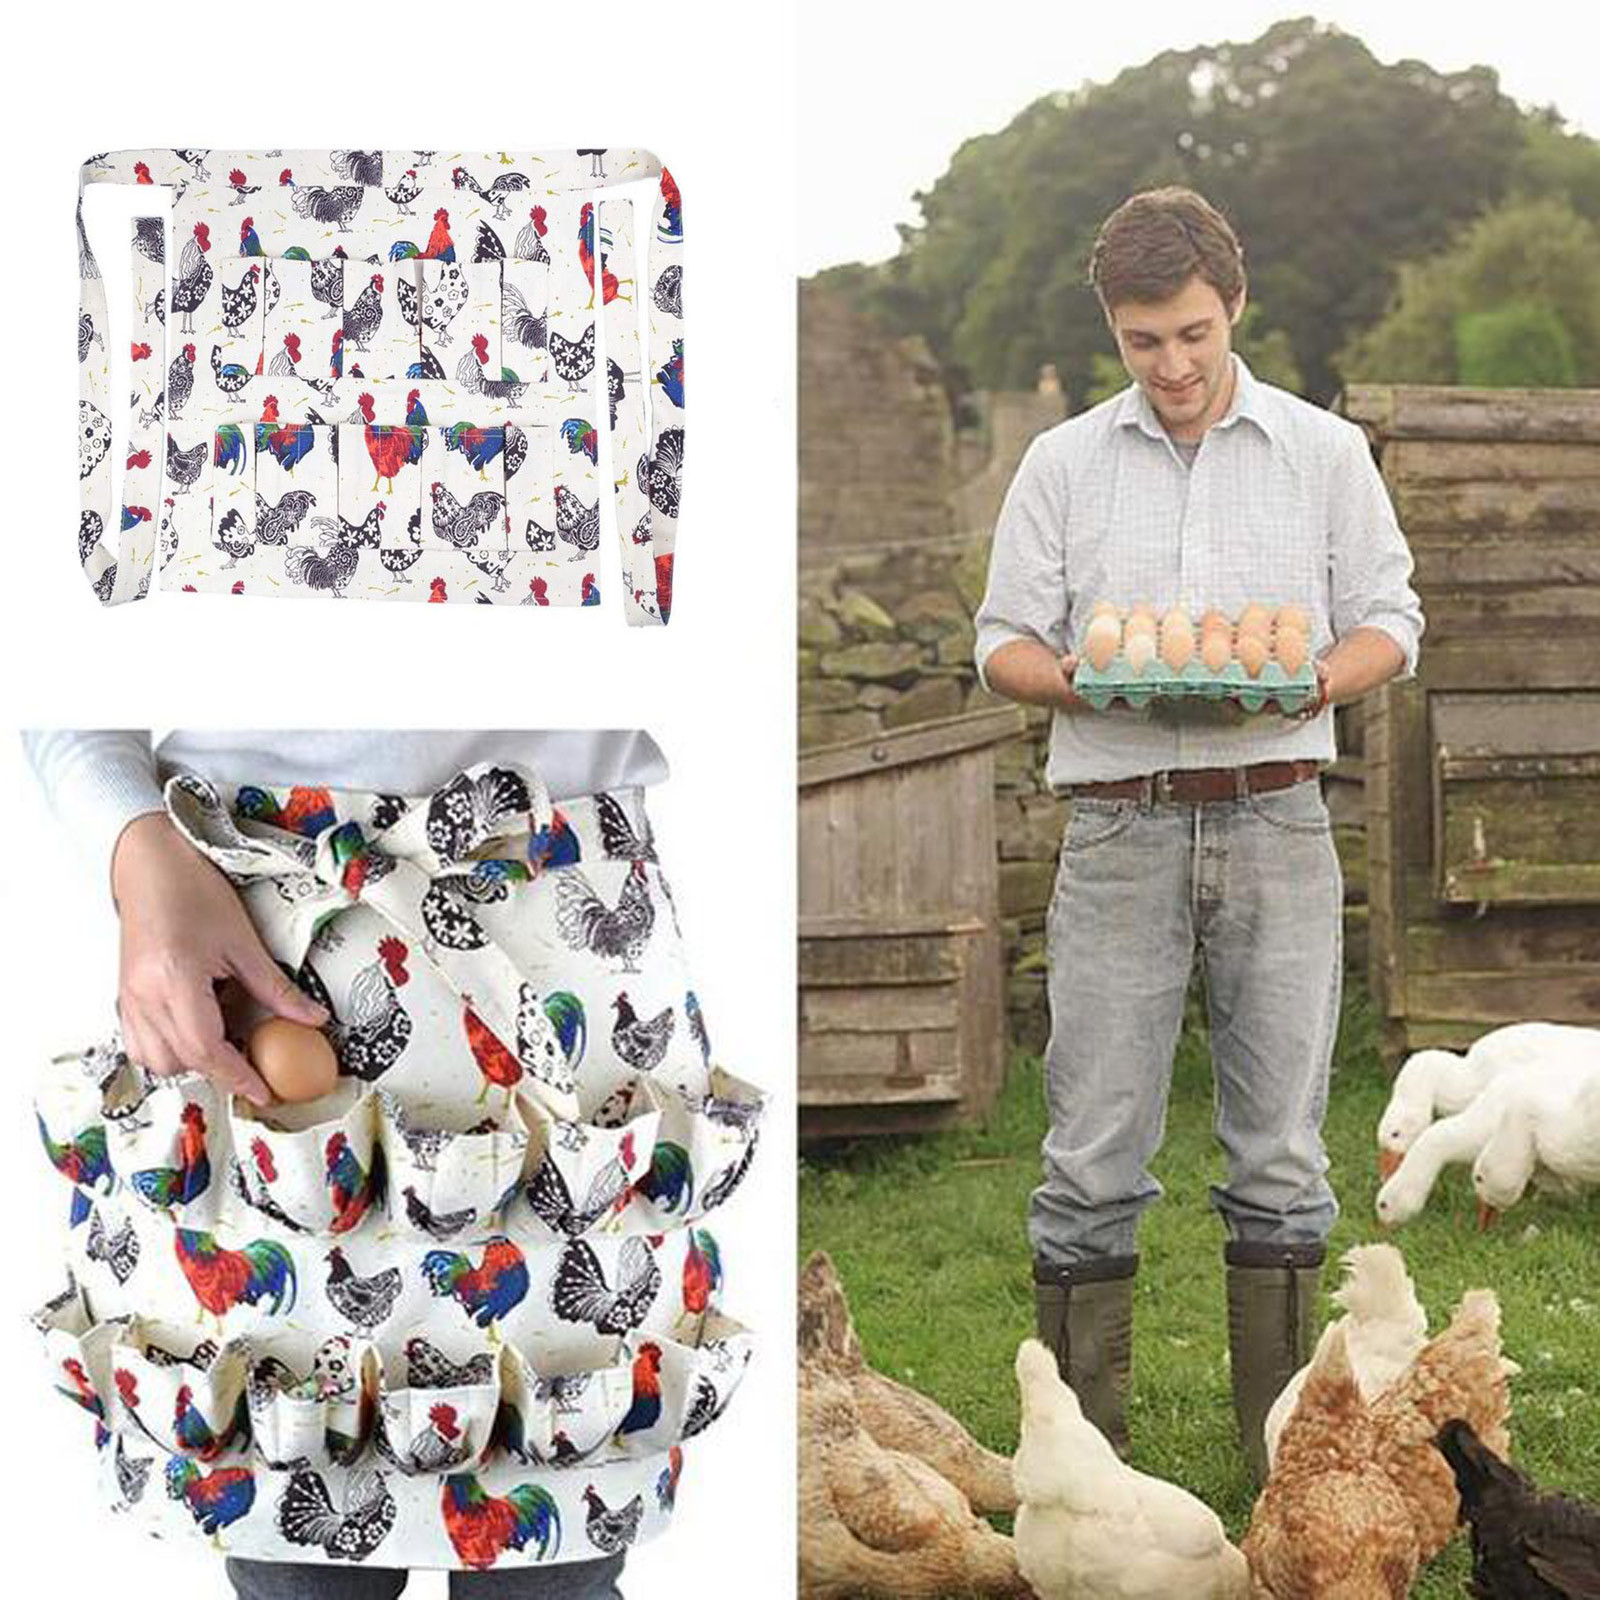 WAYUTO Chicken Egg Apron 12 Deep Pockets Hen Duck Goose Eggs Holder Aprons  Eggs Collecting Gathering Holding Apron